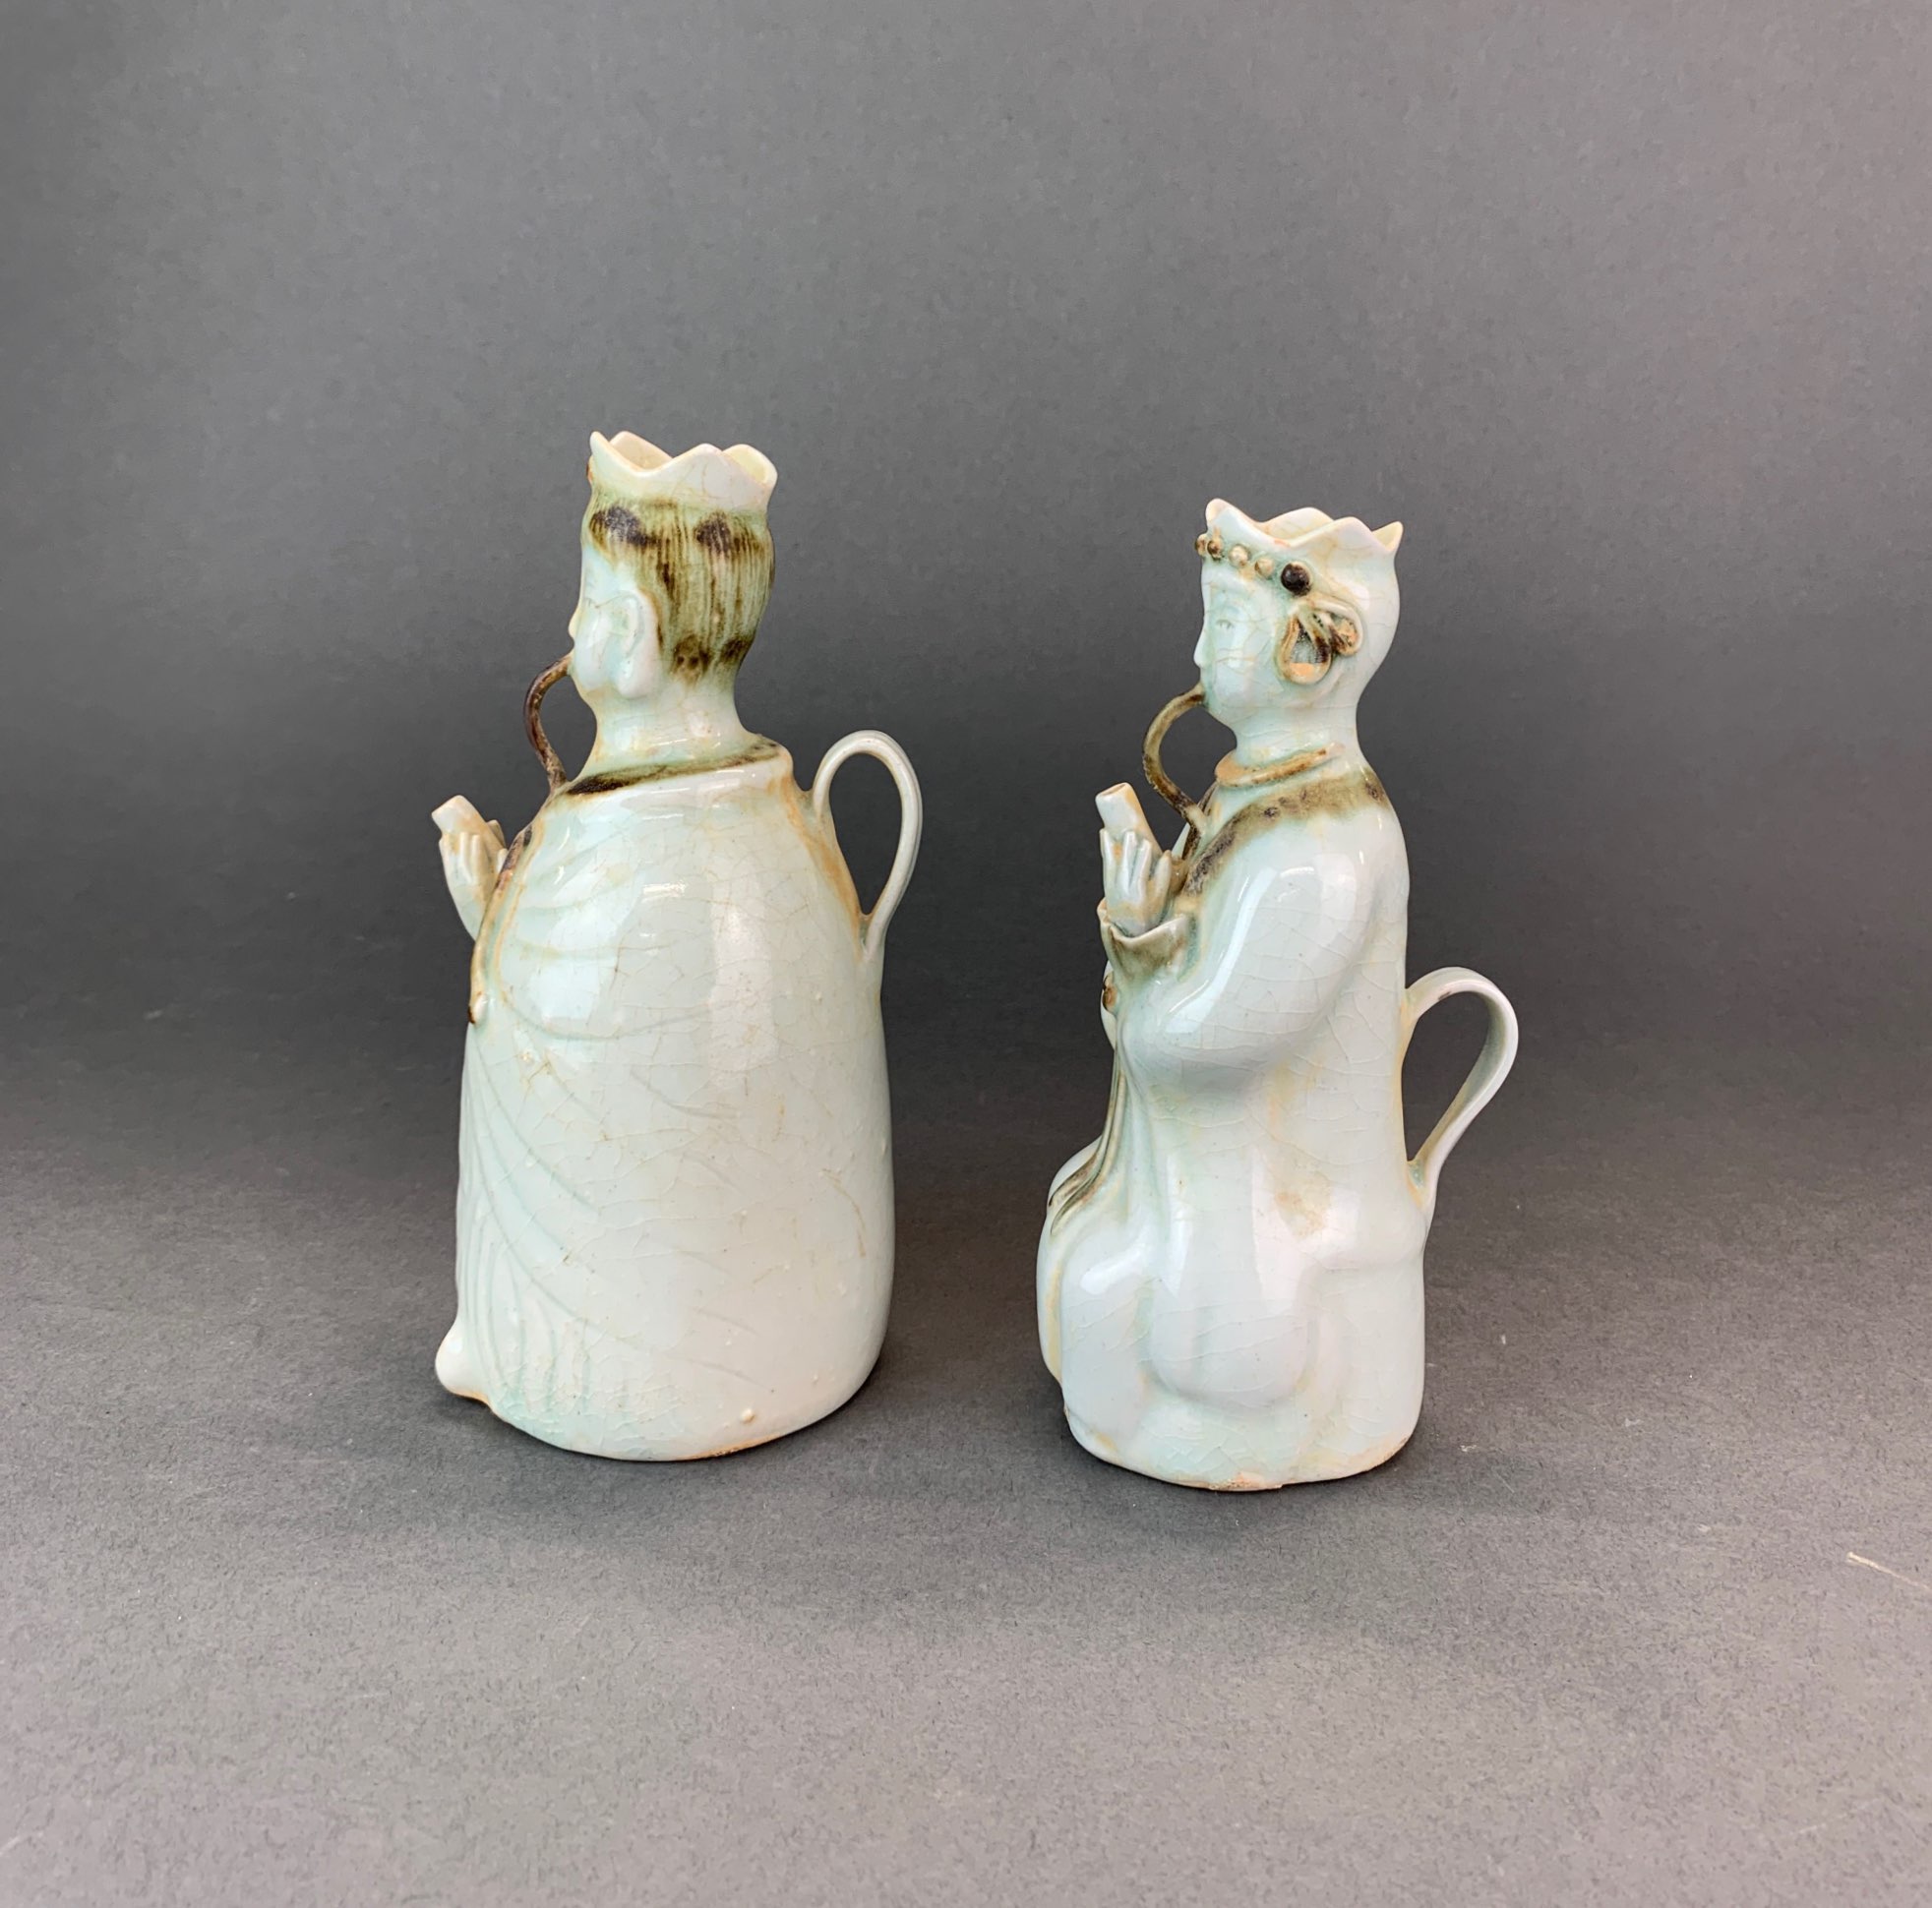 A pair of Chinese celadon glazed porcelain figural wine jugs, H. 19cm. - Image 2 of 4